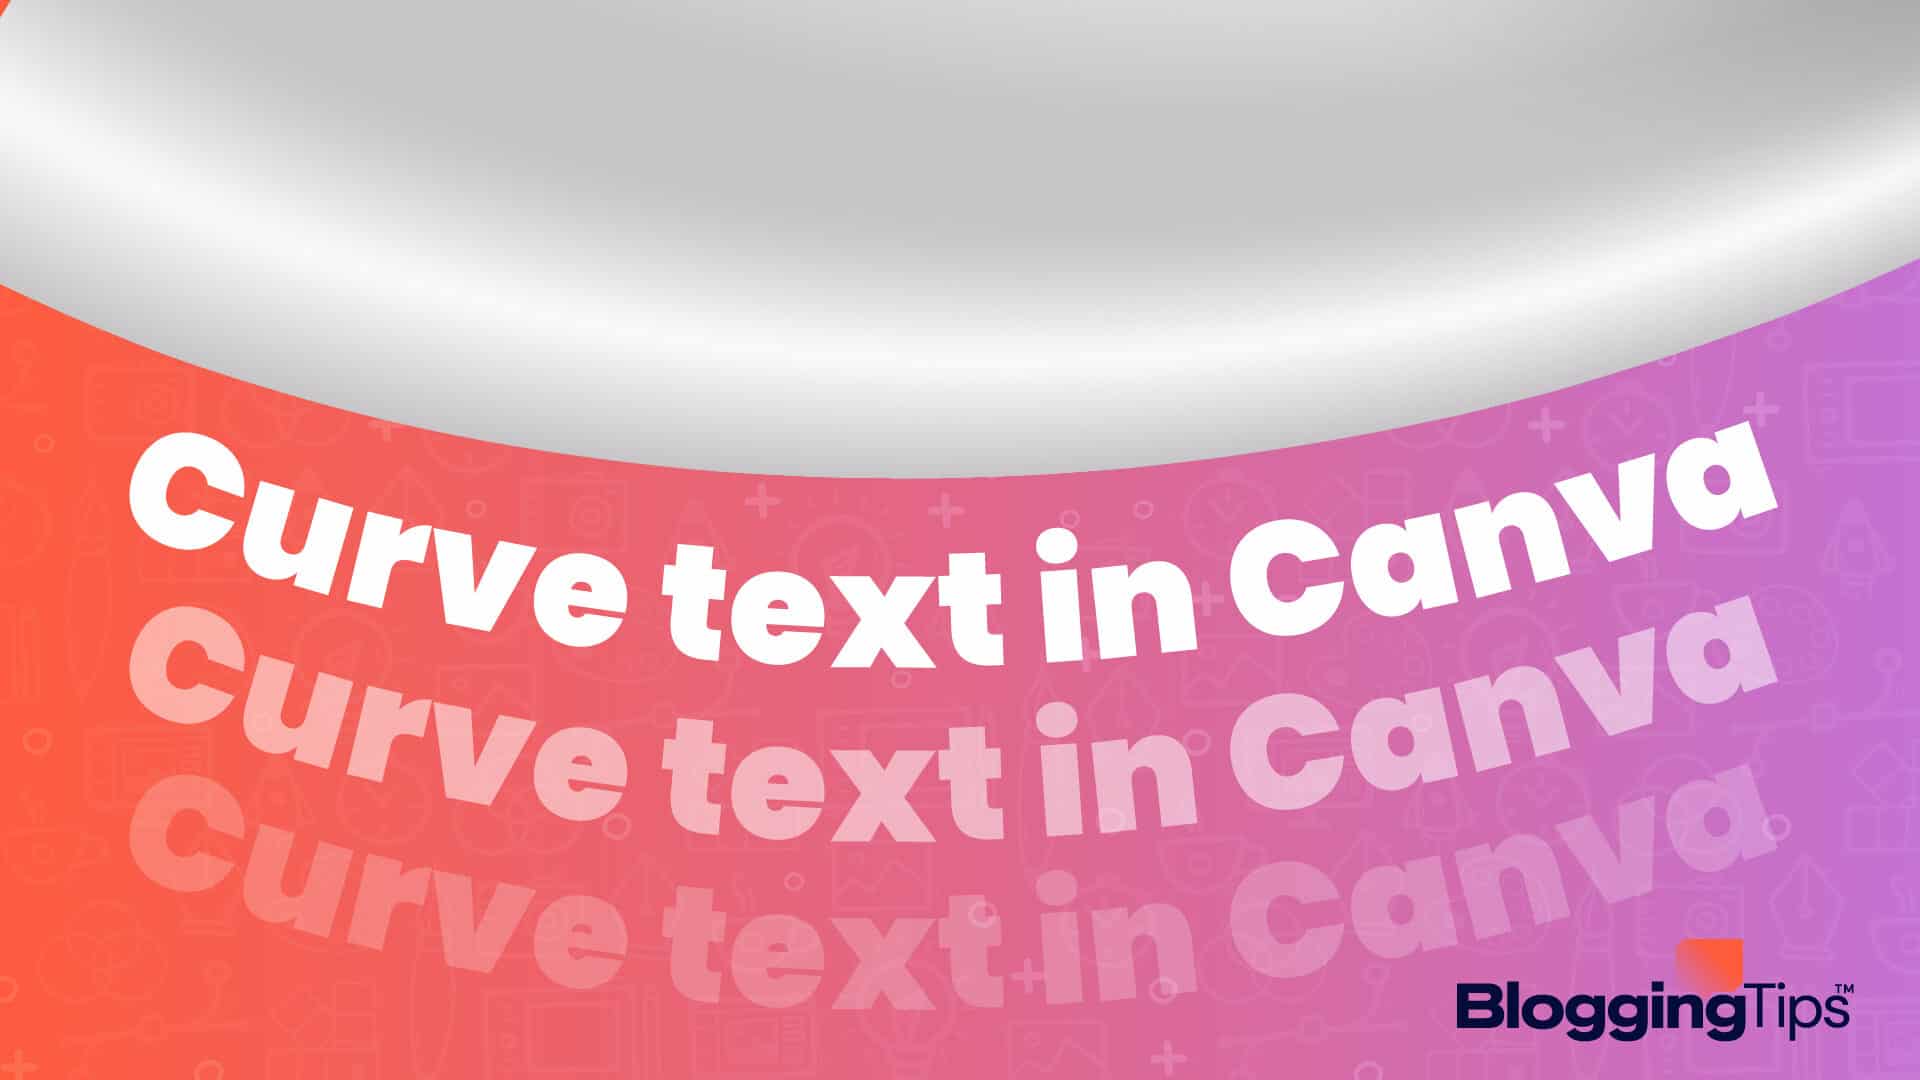 vector graphic showing an illustration of how to curve text in canva